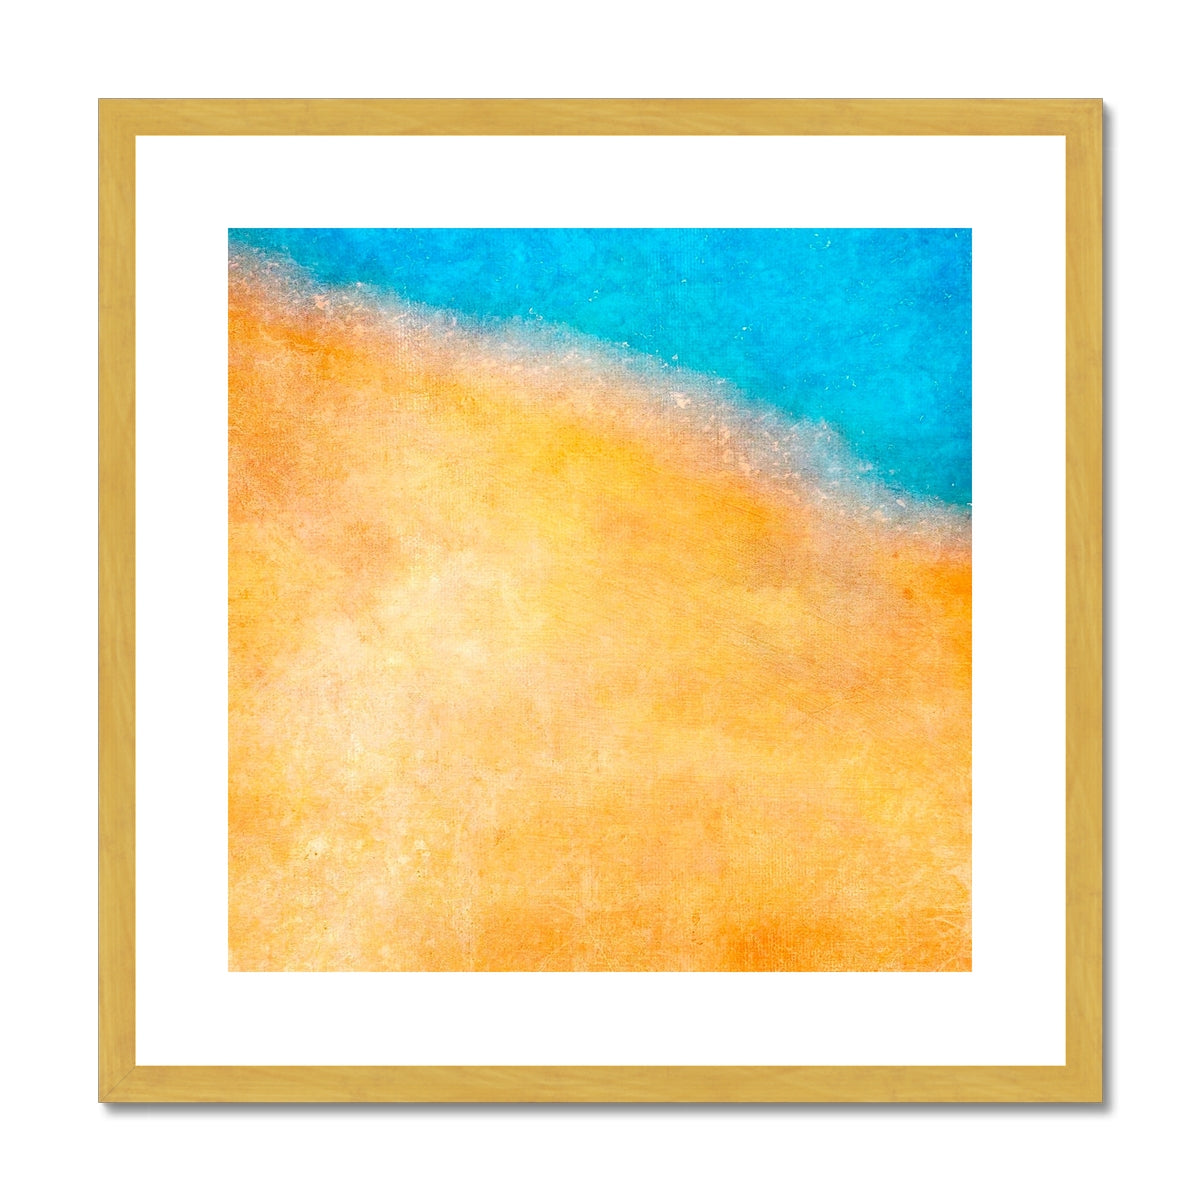 The Shoreline Abstract Painting | Antique Framed & Mounted Prints From Scotland-Antique Framed & Mounted Prints-Abstract & Impressionistic Art Gallery-20"x20"-Gold Frame-Paintings, Prints, Homeware, Art Gifts From Scotland By Scottish Artist Kevin Hunter